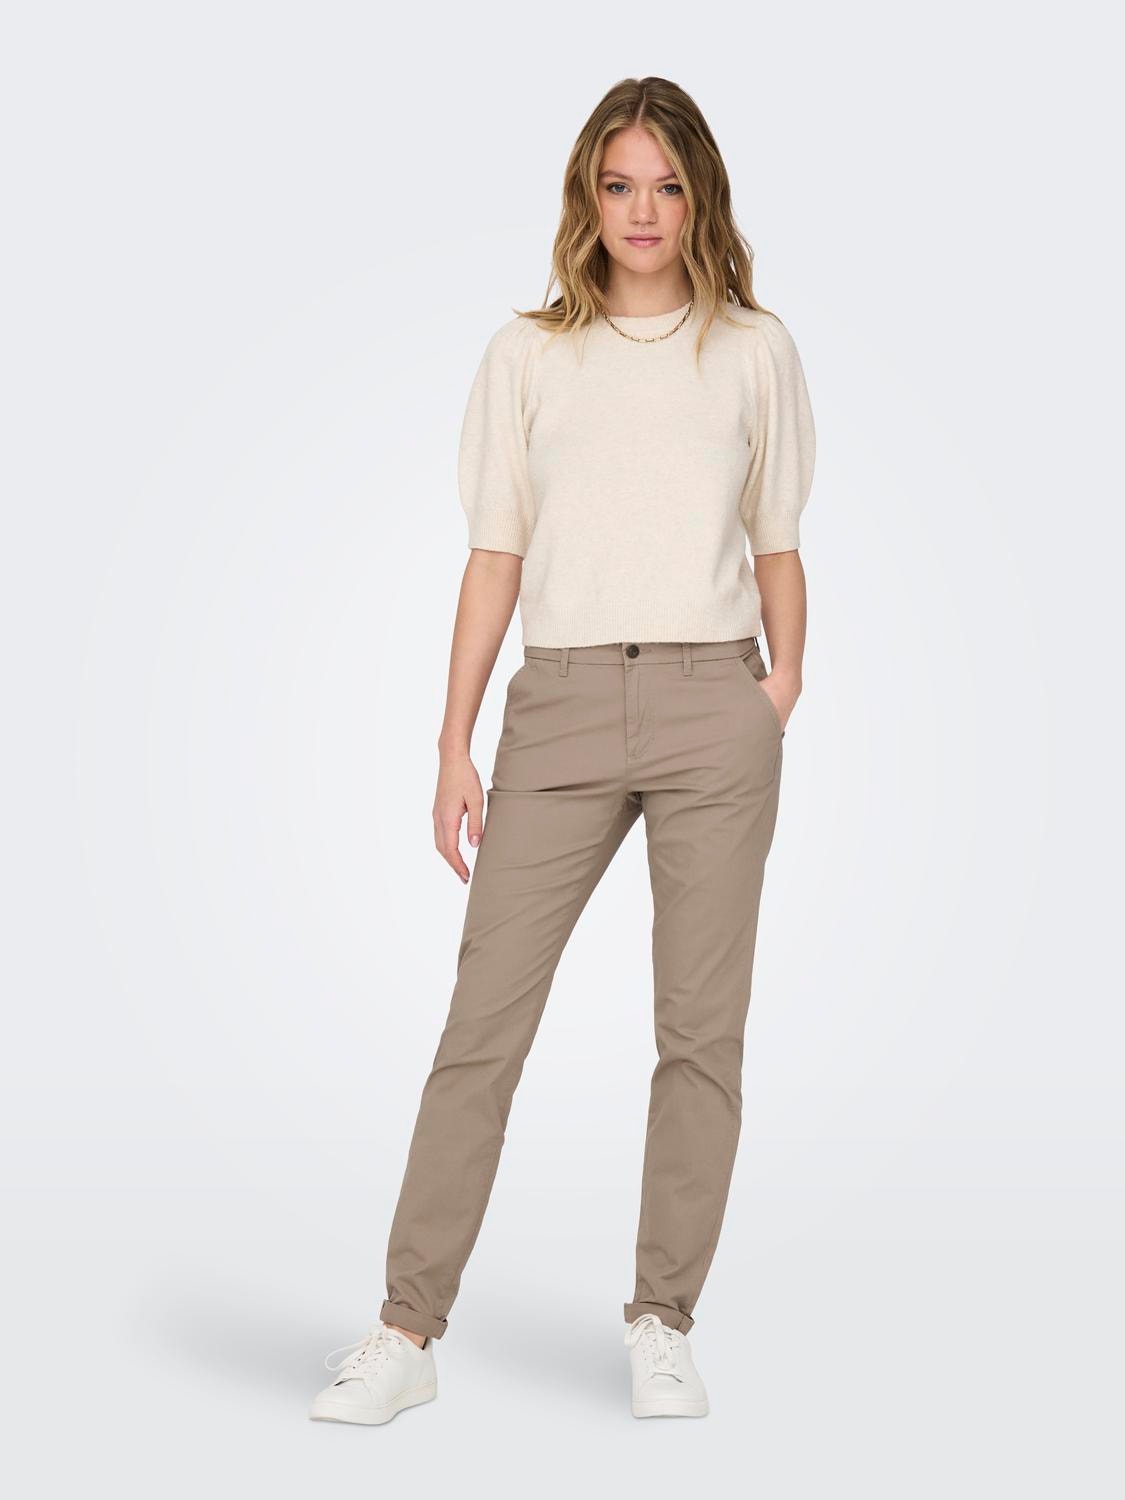 ONLY Slim Fit Trousers -Silver Mink - 15200641